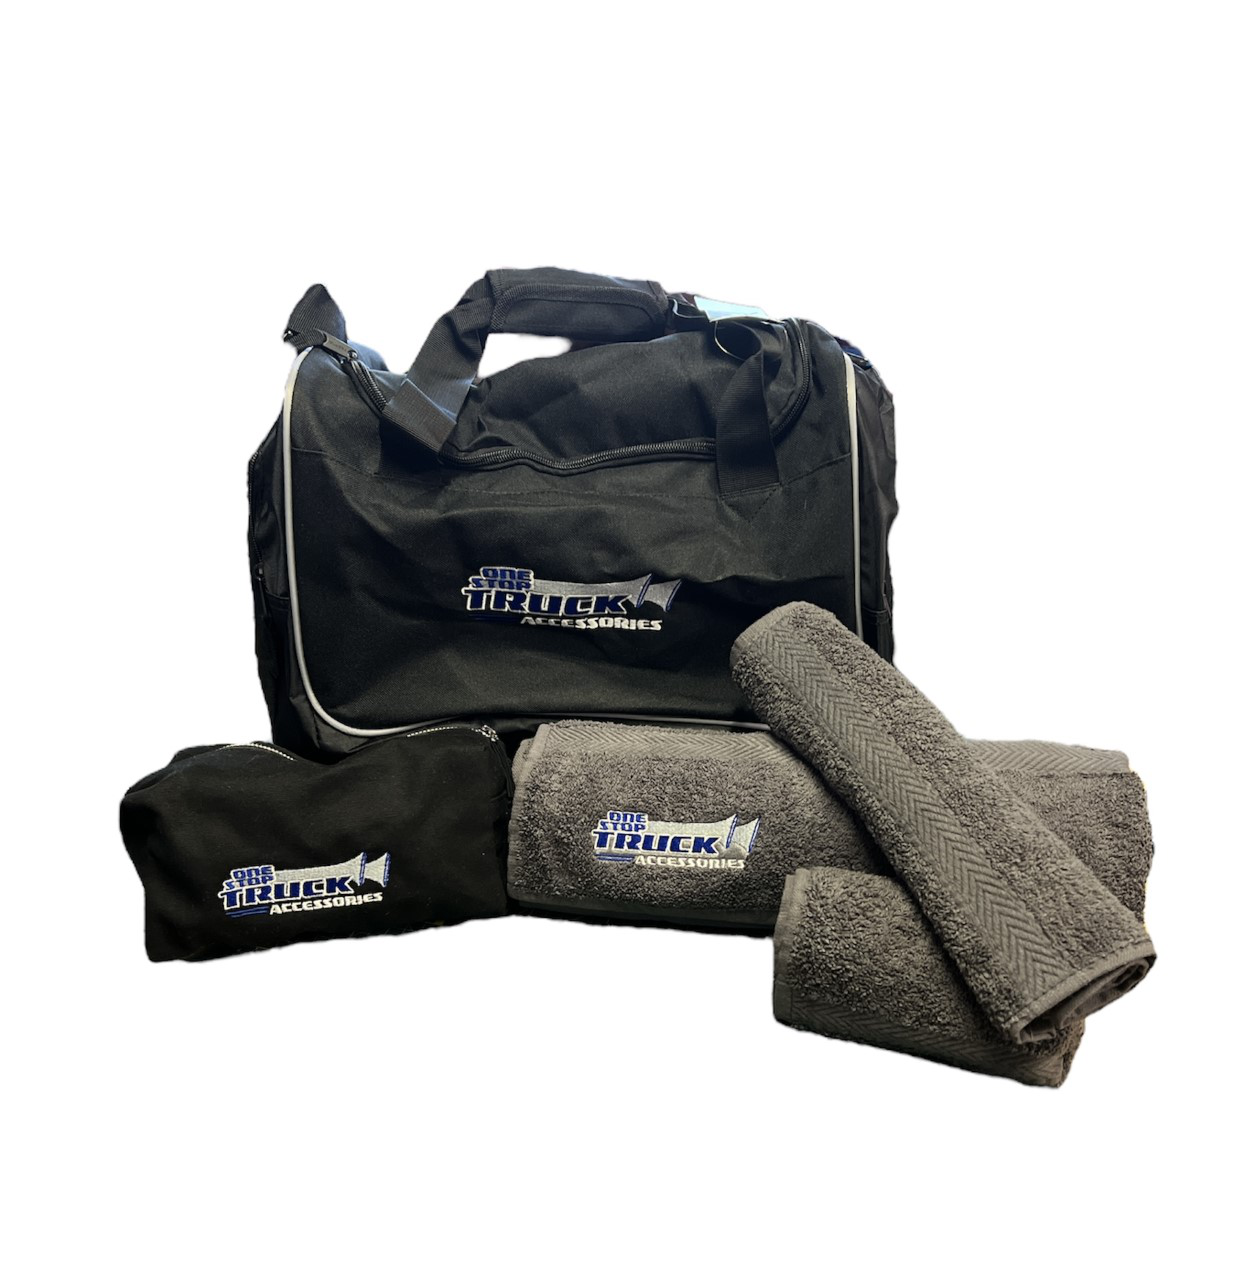 One Stop Truck Accessories Holdall Bag Set - One Stop Truck Accessories Ltd